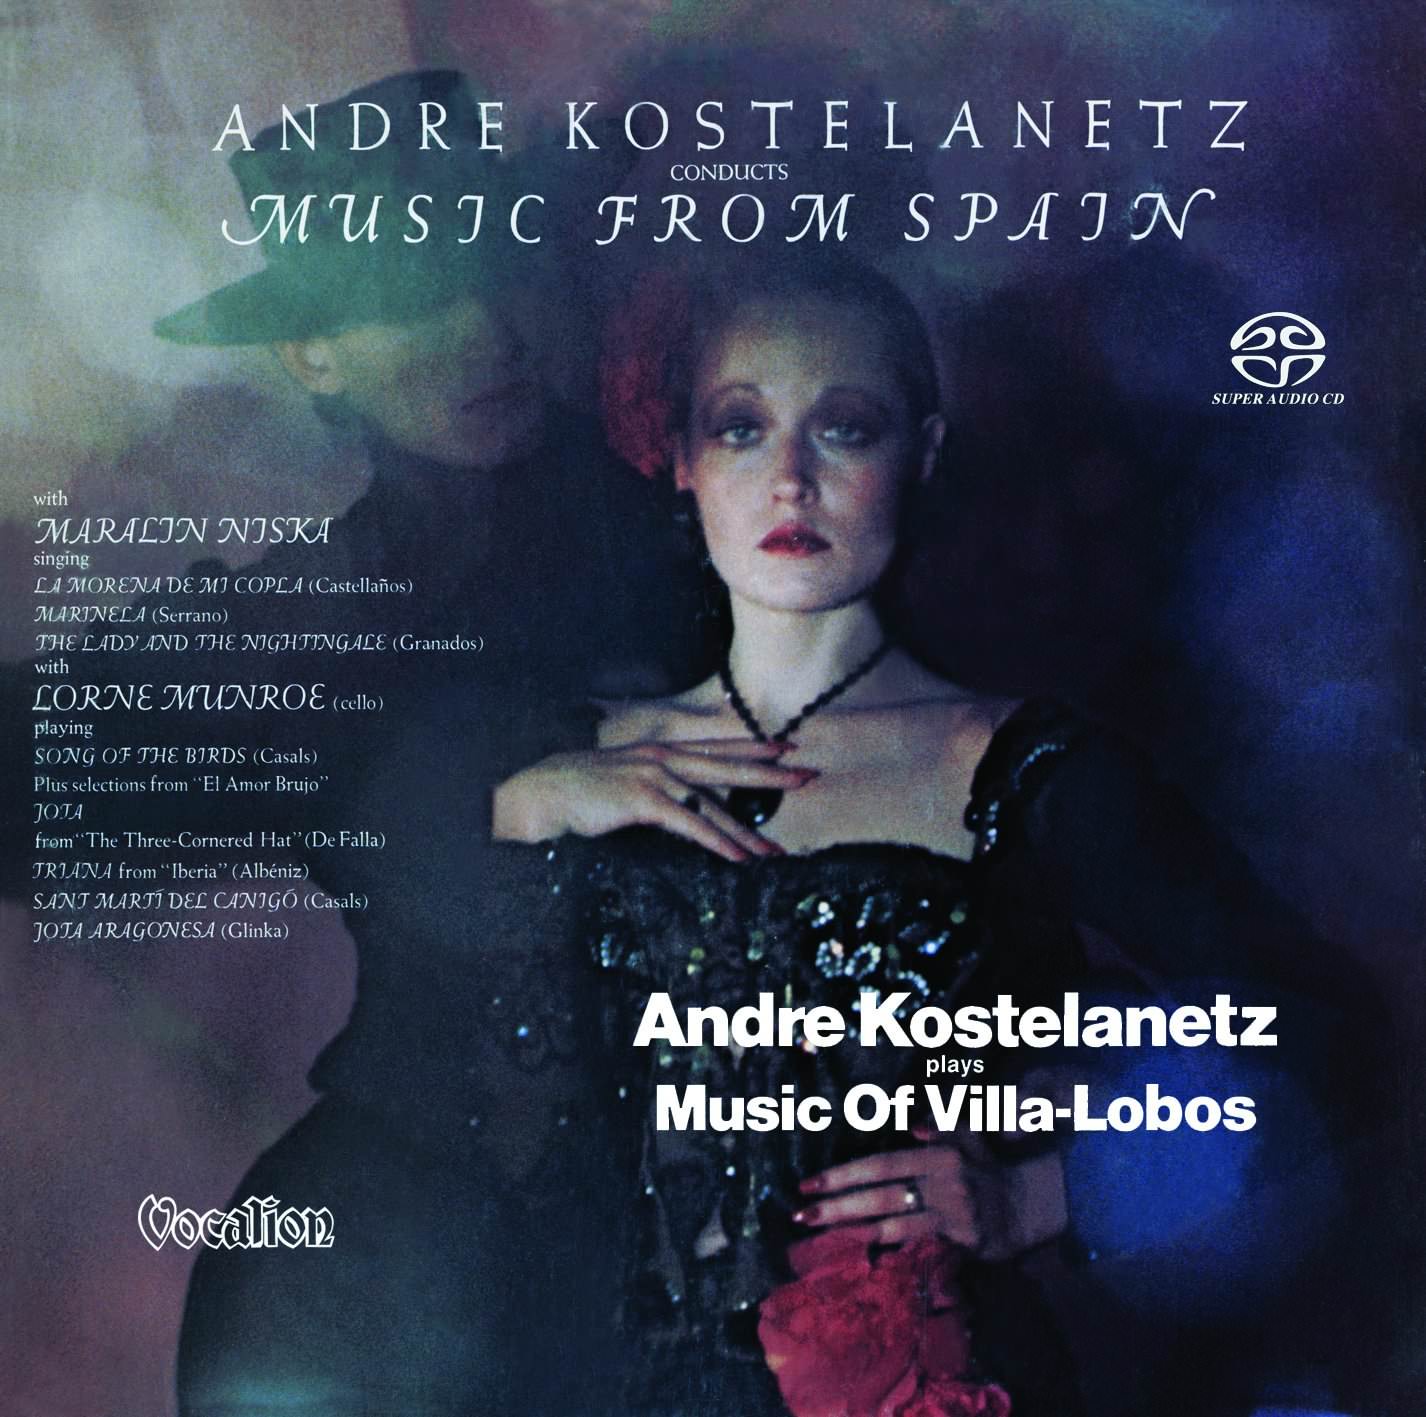 Andre Kostelanetz – Plays Music Of Villa-Lobos & Conducts Music From Spain (1974) [Reissue 2017] MCH SACD ISO + Hi-Res FLAC